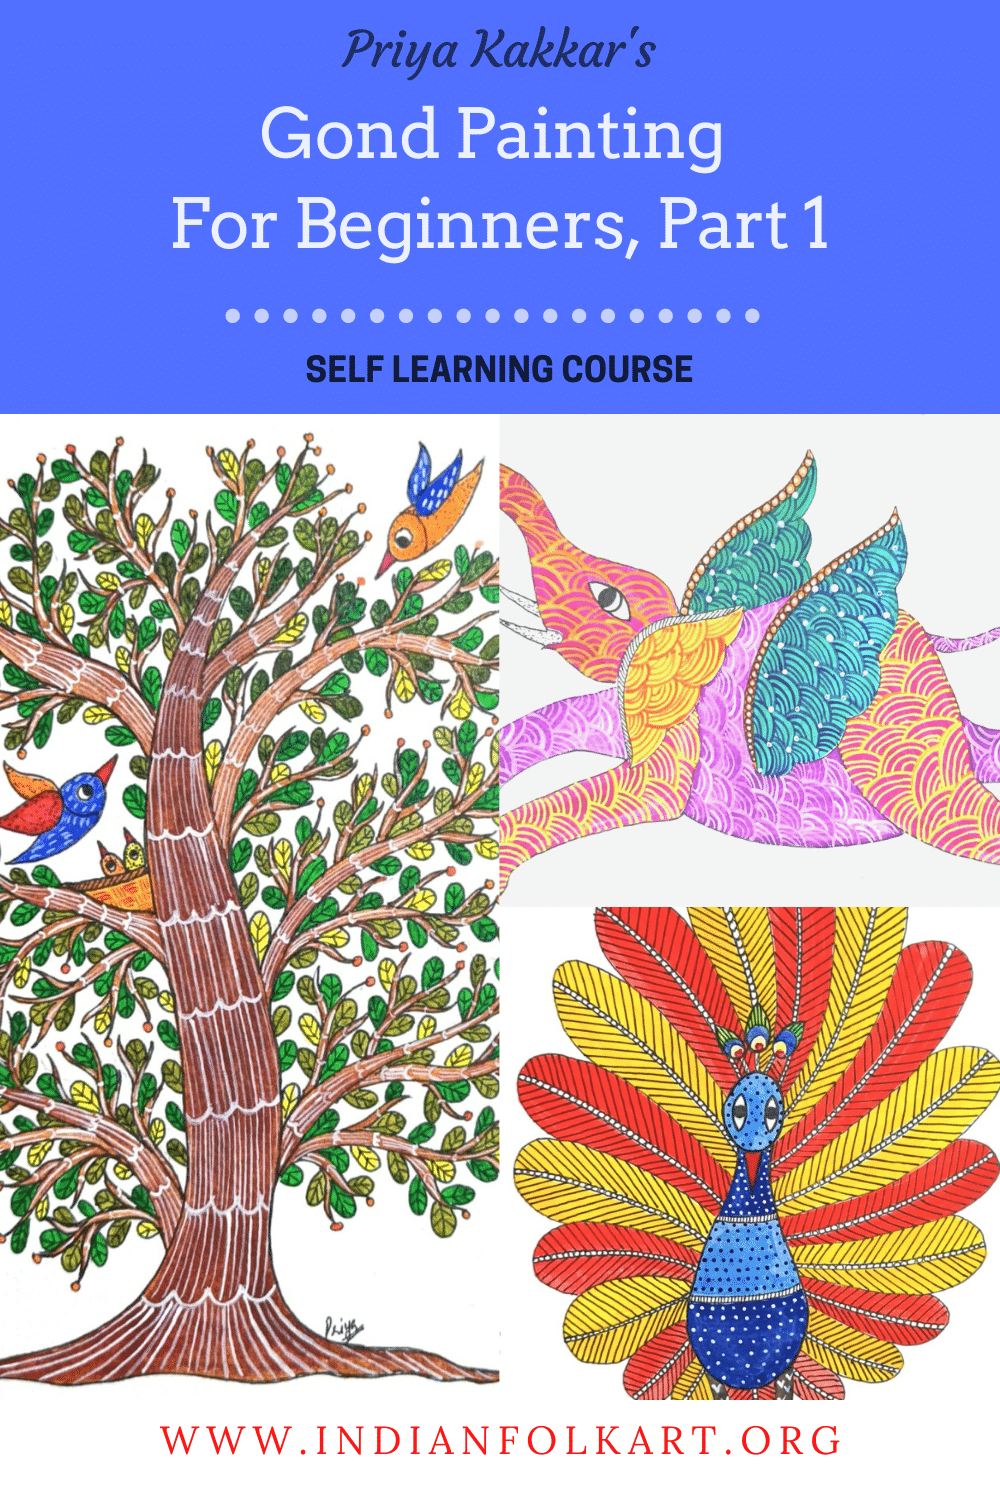 PK02 Gond Art for Beginners, Elephant, Tree and Peacock Painting. [Level 1]